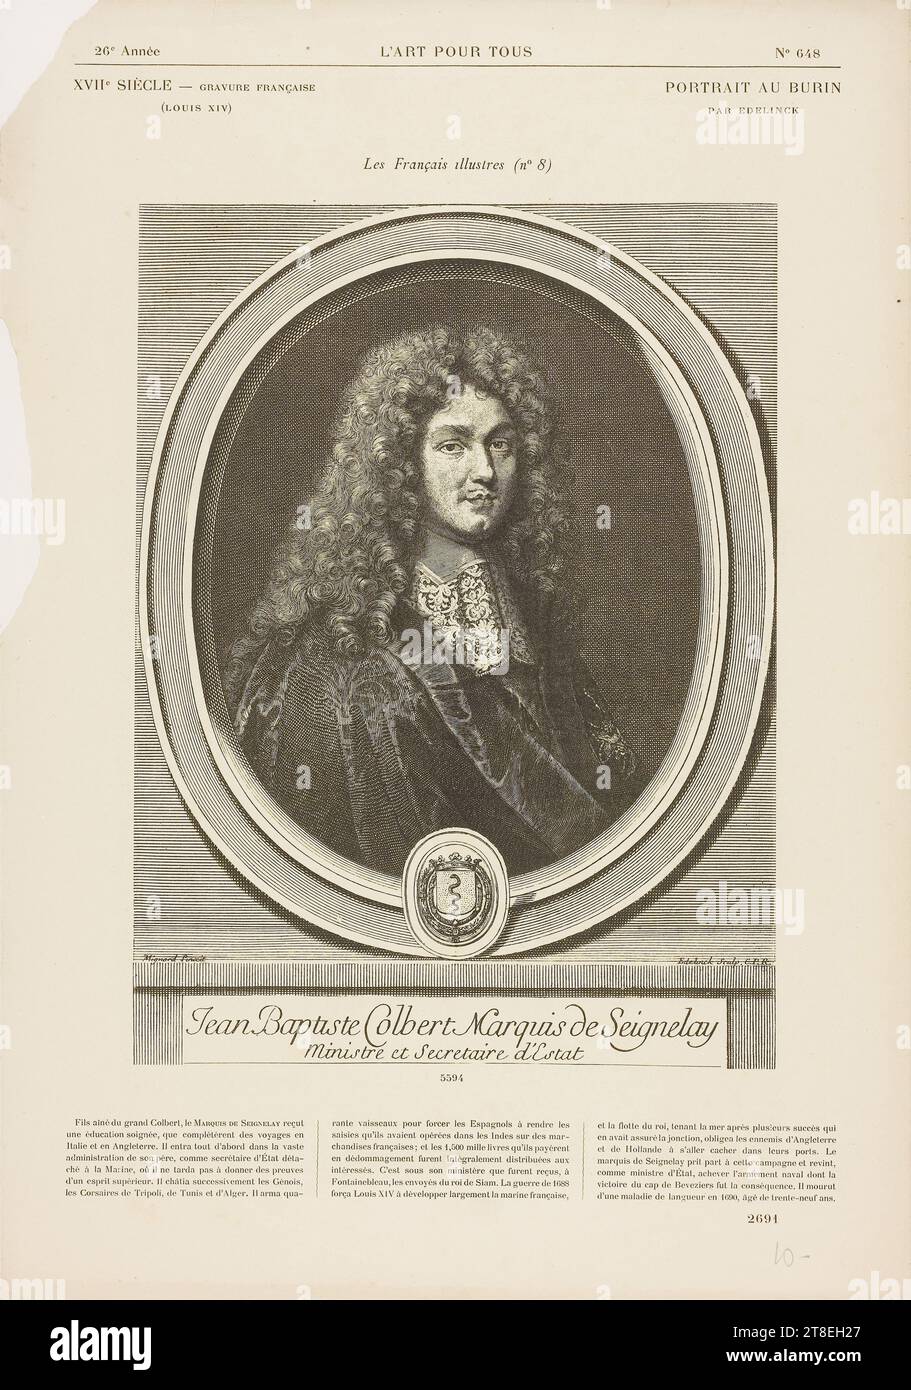 Mignard Pinxit. Edelinck Sculp. C.P.R. Jean Baptiste Colbert Marquis de Seignelay Minister and Secretary of State. 26th Year ART FOR ALL N° 648. XVIIth CENTURY - FRENCH ENGRAVING (LOUIS XIV). PORTRAIT TO THE BURIN BY EDELINCK. The illustrious French (No. 8). 5594. [biography Jean Baptiste Colbert]. 2691 Stock Photo